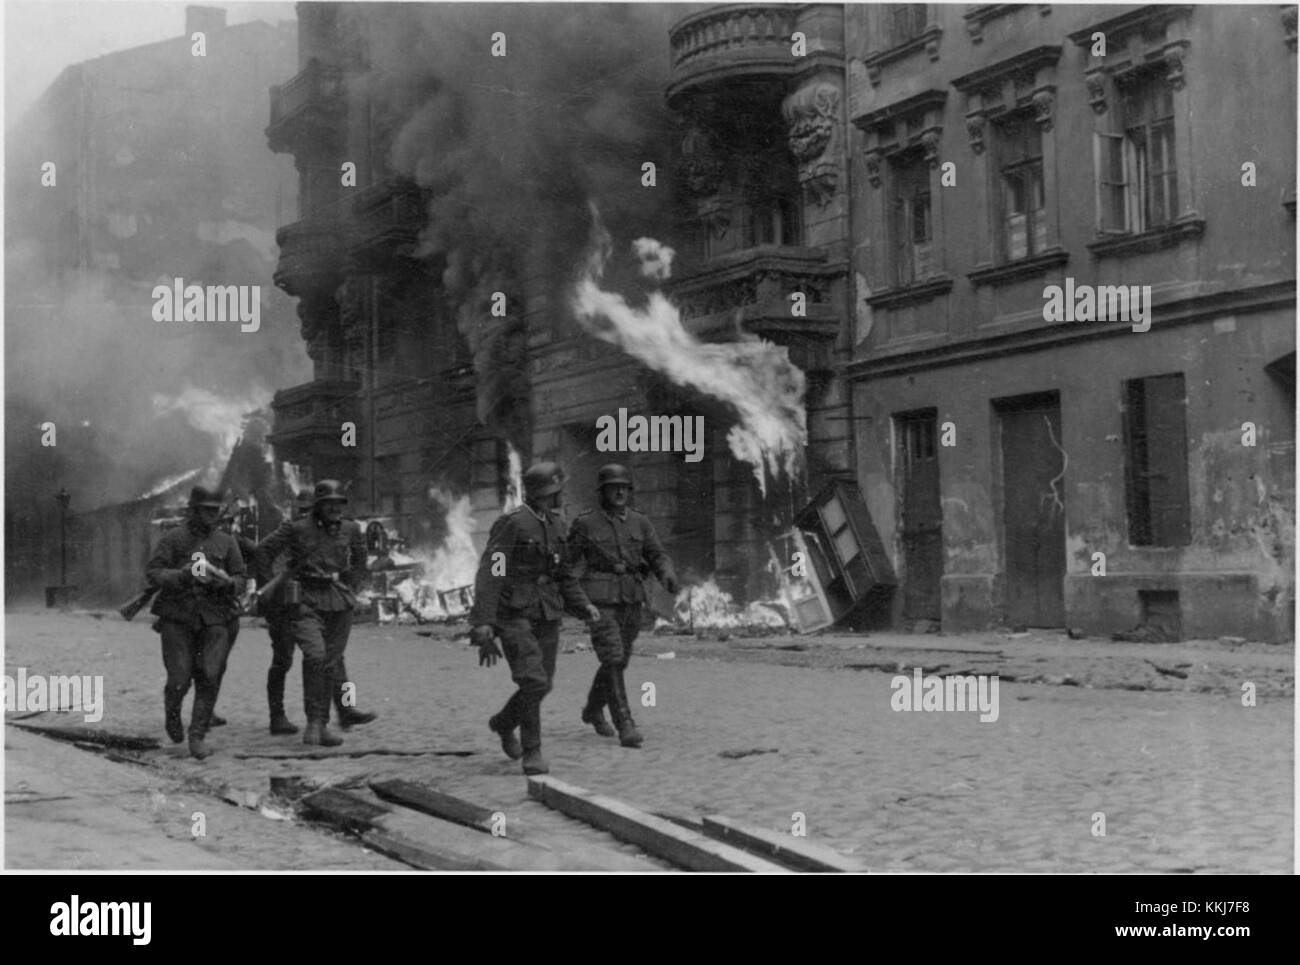 Stroop Report 2/4 Record Group 038 United States Counsel for the Prosecution of Axis Criminality; United States Exhibits, 1933-46 HMS Asset Id: HF1-88454435 ReDiscovery Number: 06315 Ghetto Uprising Warsaw2 Stock Photo